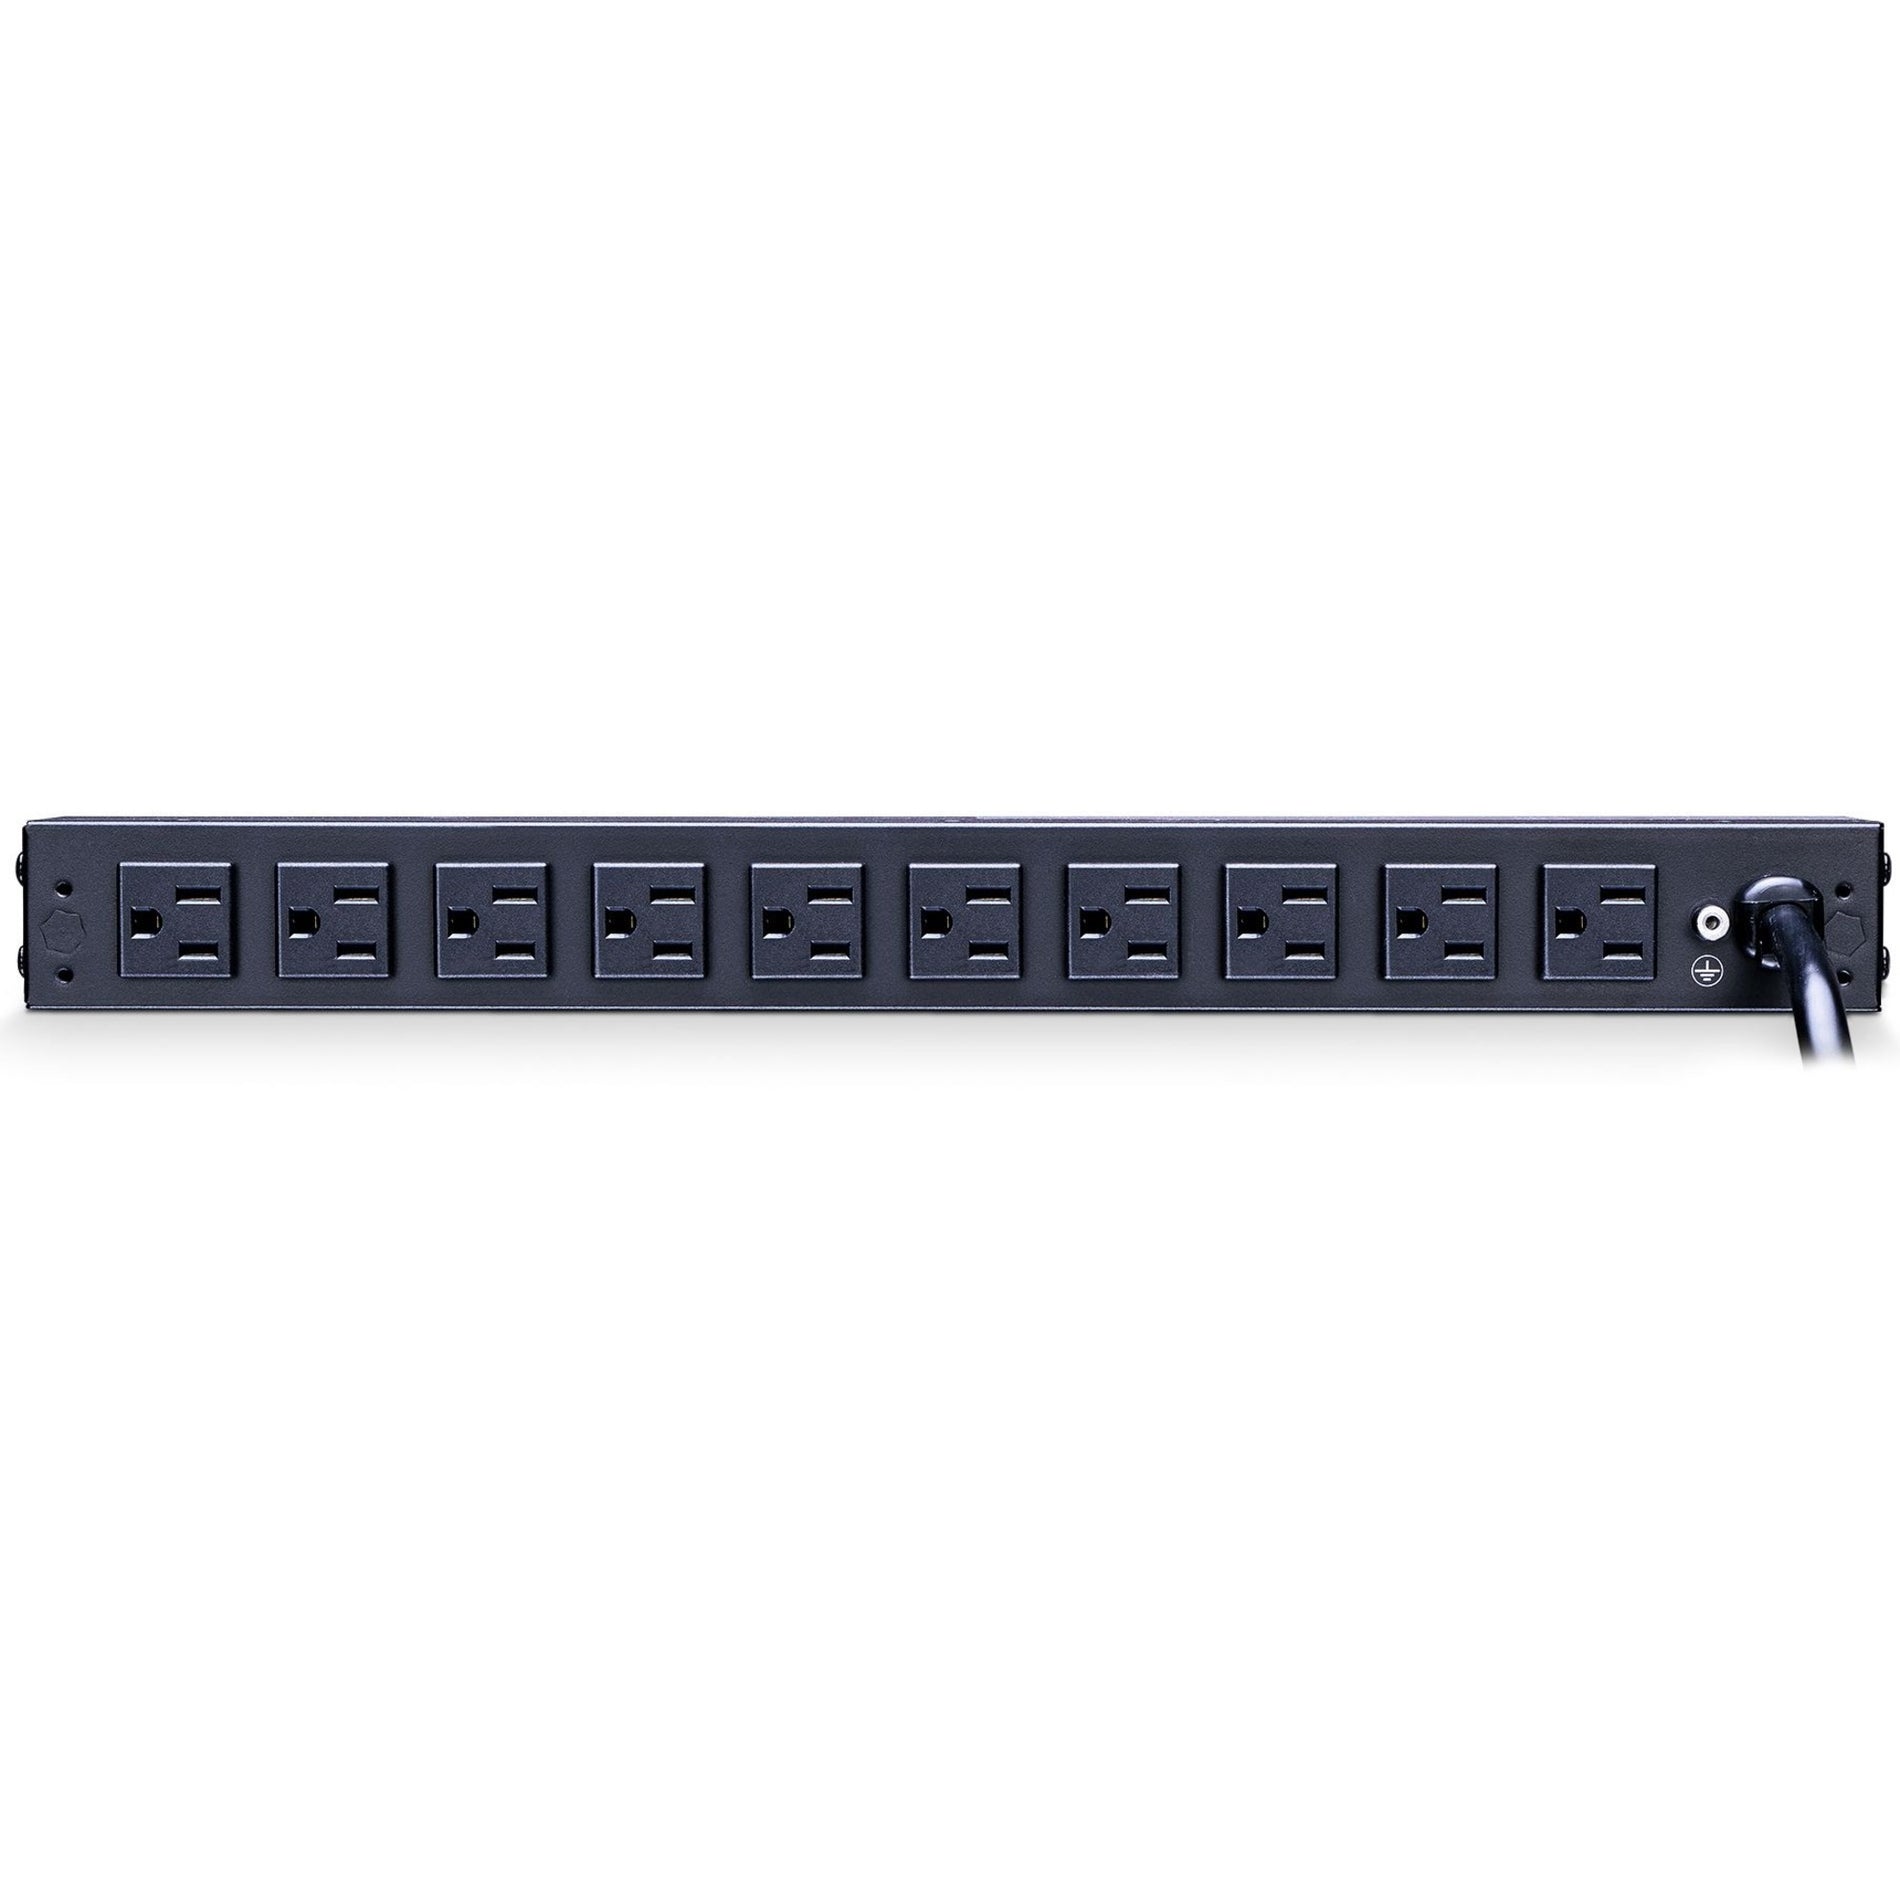 CyberPower PDU15M2F10R 12-Outlets PDU, 100-125VAC 15A Metered Power Distribution Unit